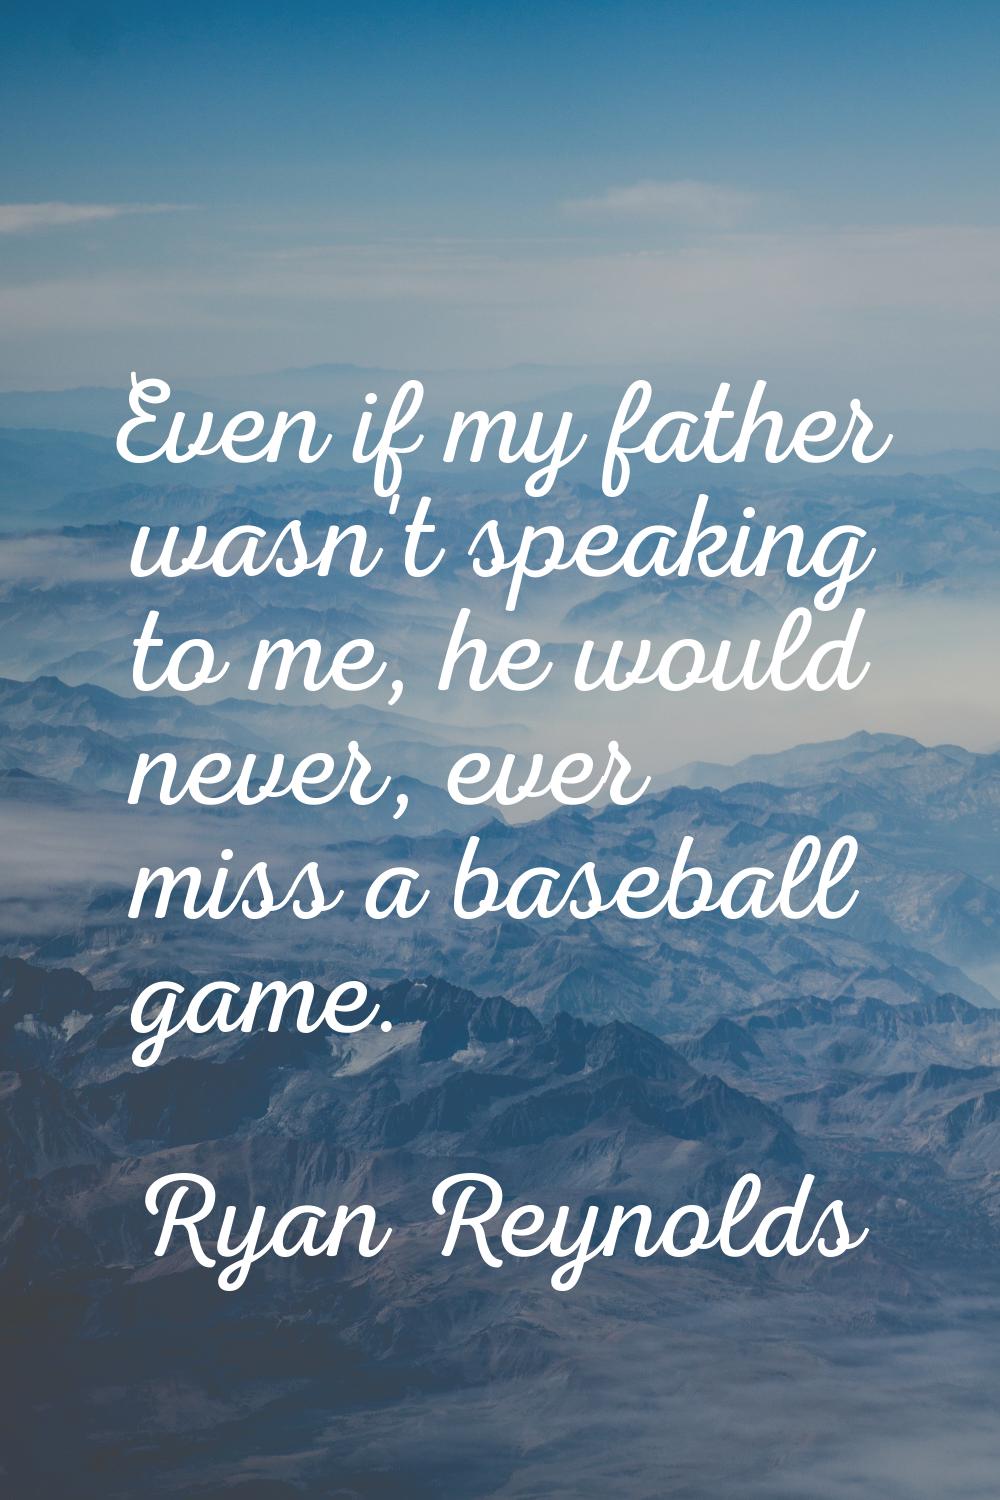 Even if my father wasn't speaking to me, he would never, ever miss a baseball game.